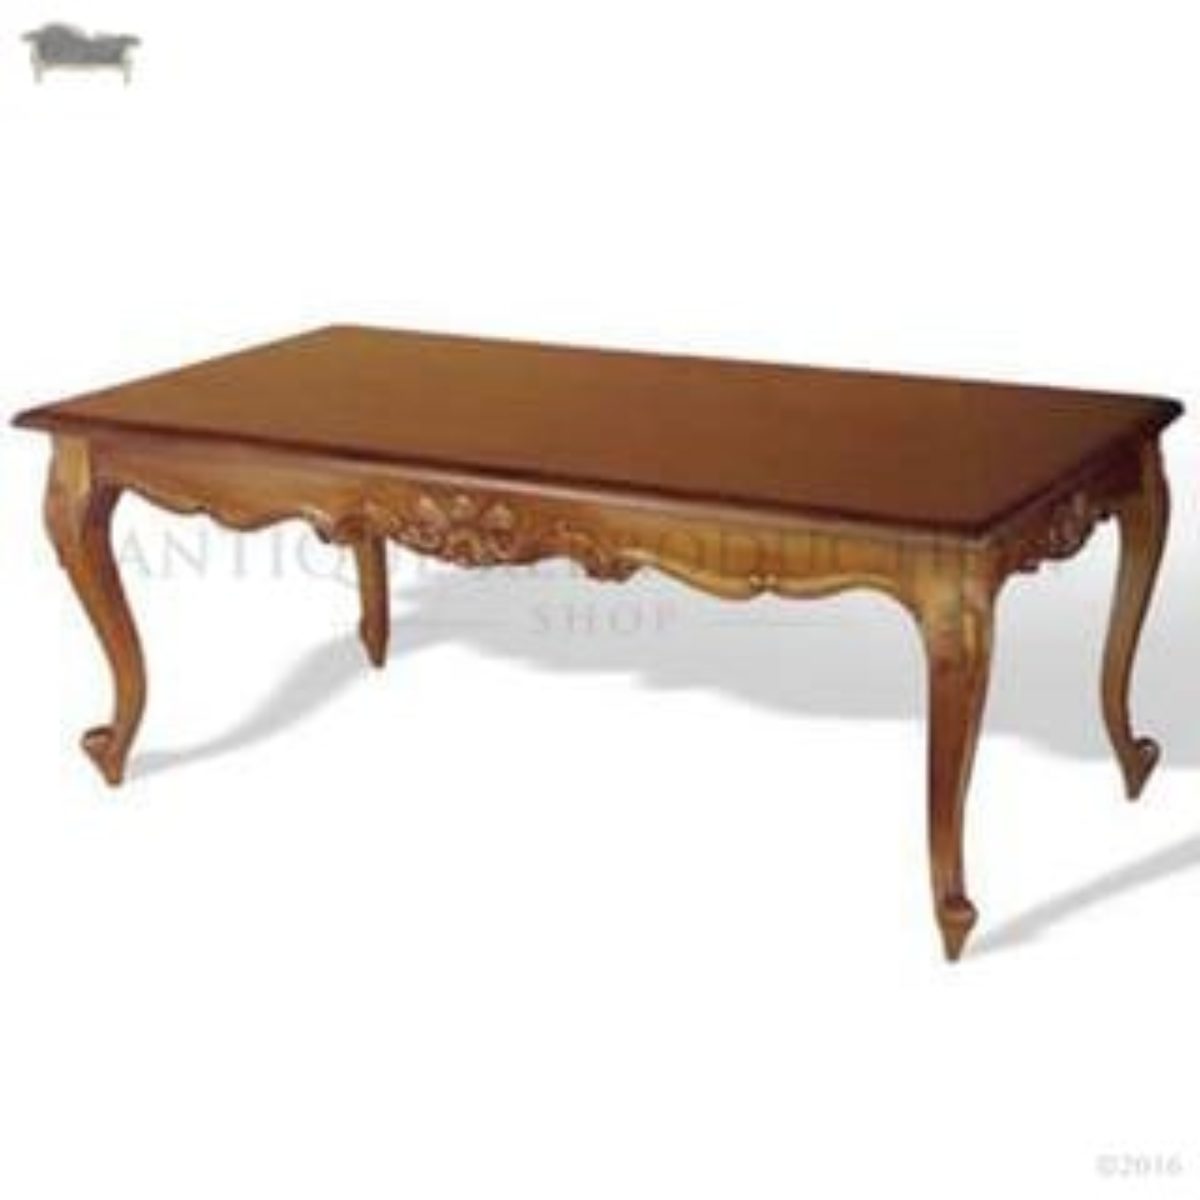 Queen Anne Coffee Table Antique Reproduction Shop